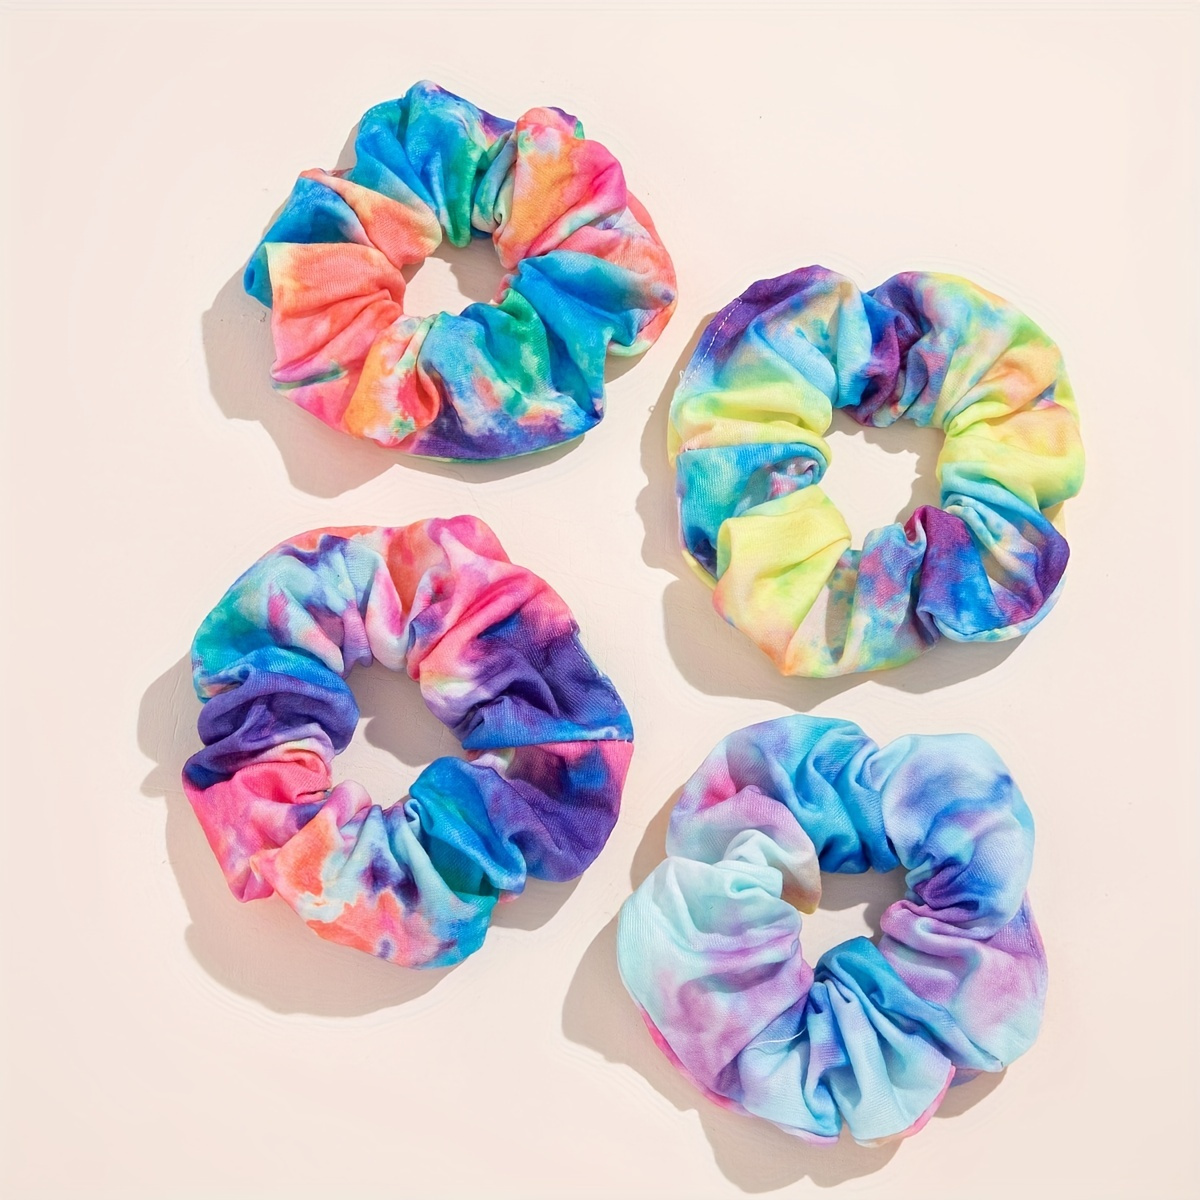 

4pcs Bohemian Tie Dye Hair Scrunchies For Women And - Soft Fabric Retro Hair Ties For Curly, Fine, Thick, And Thin Hair - Stylish And Comfortable Hair Accessories